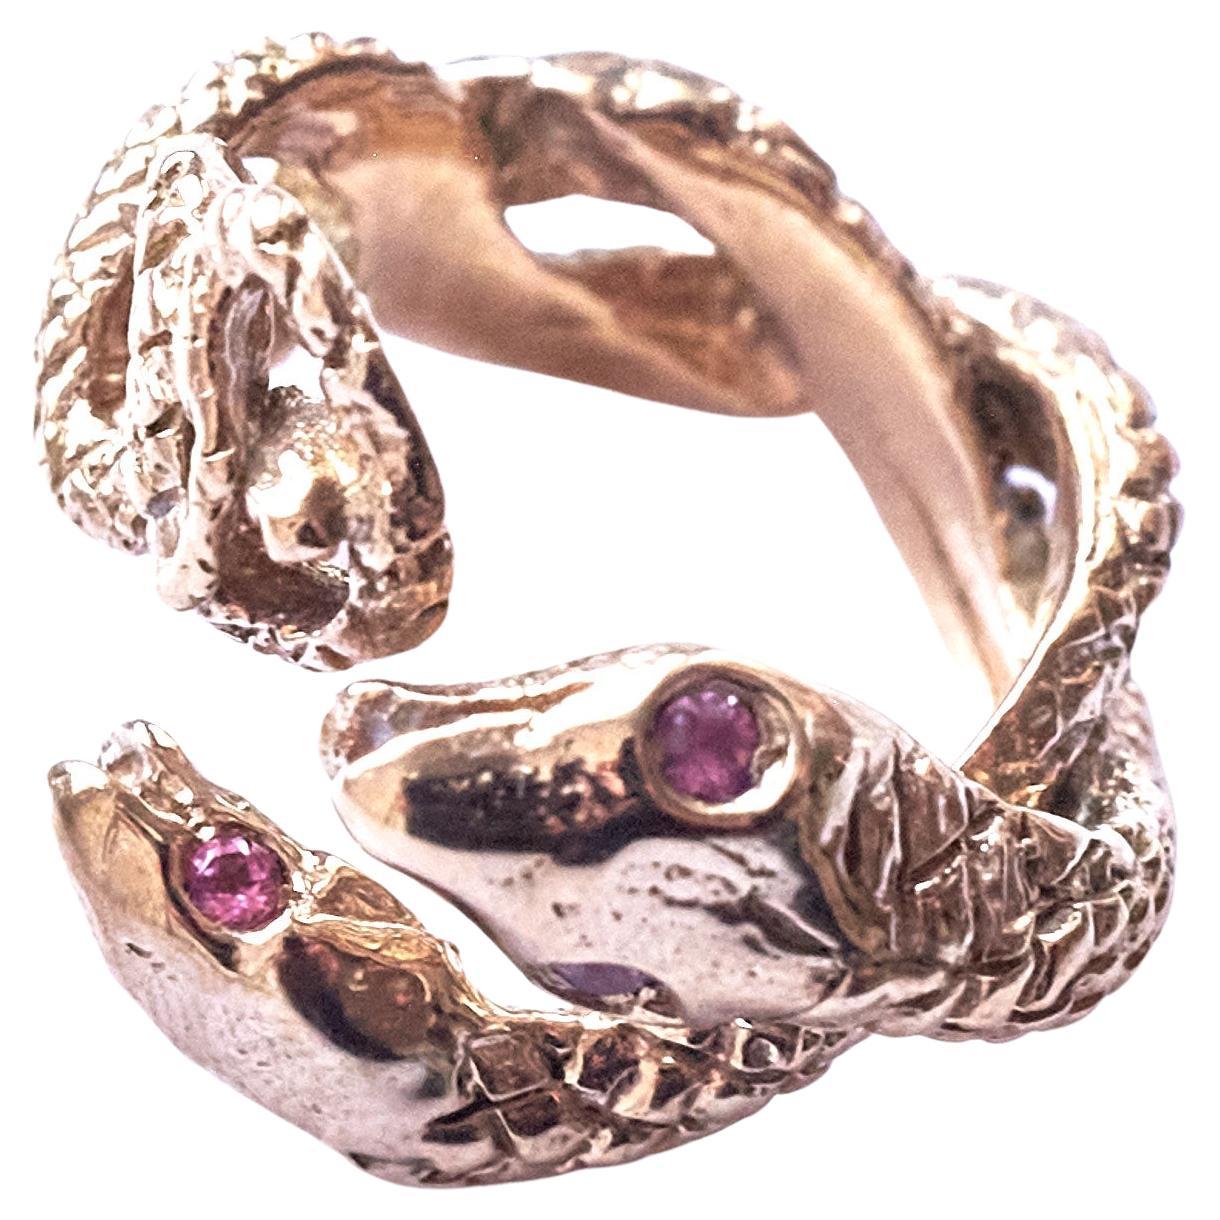 Contemporary Animal jewelry Pink Sapphire Snake Ring Bronze Cocktail Ring J Dauphin For Sale